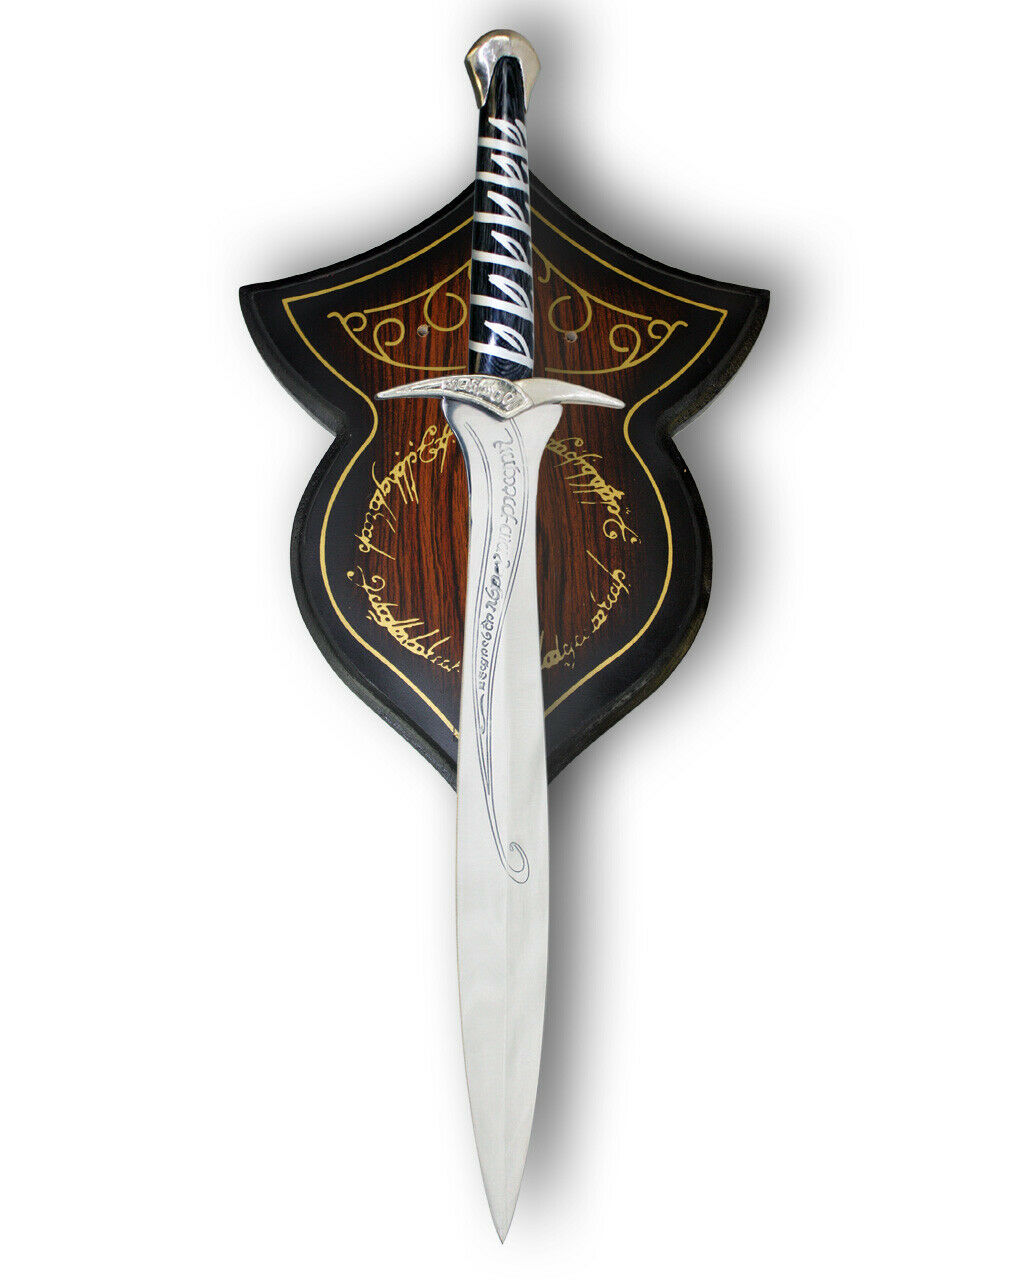 NM 031 Lord of the Rings Sting Red Elven LOTR Swords Plaque LOTR Movie Steel - Bladevip